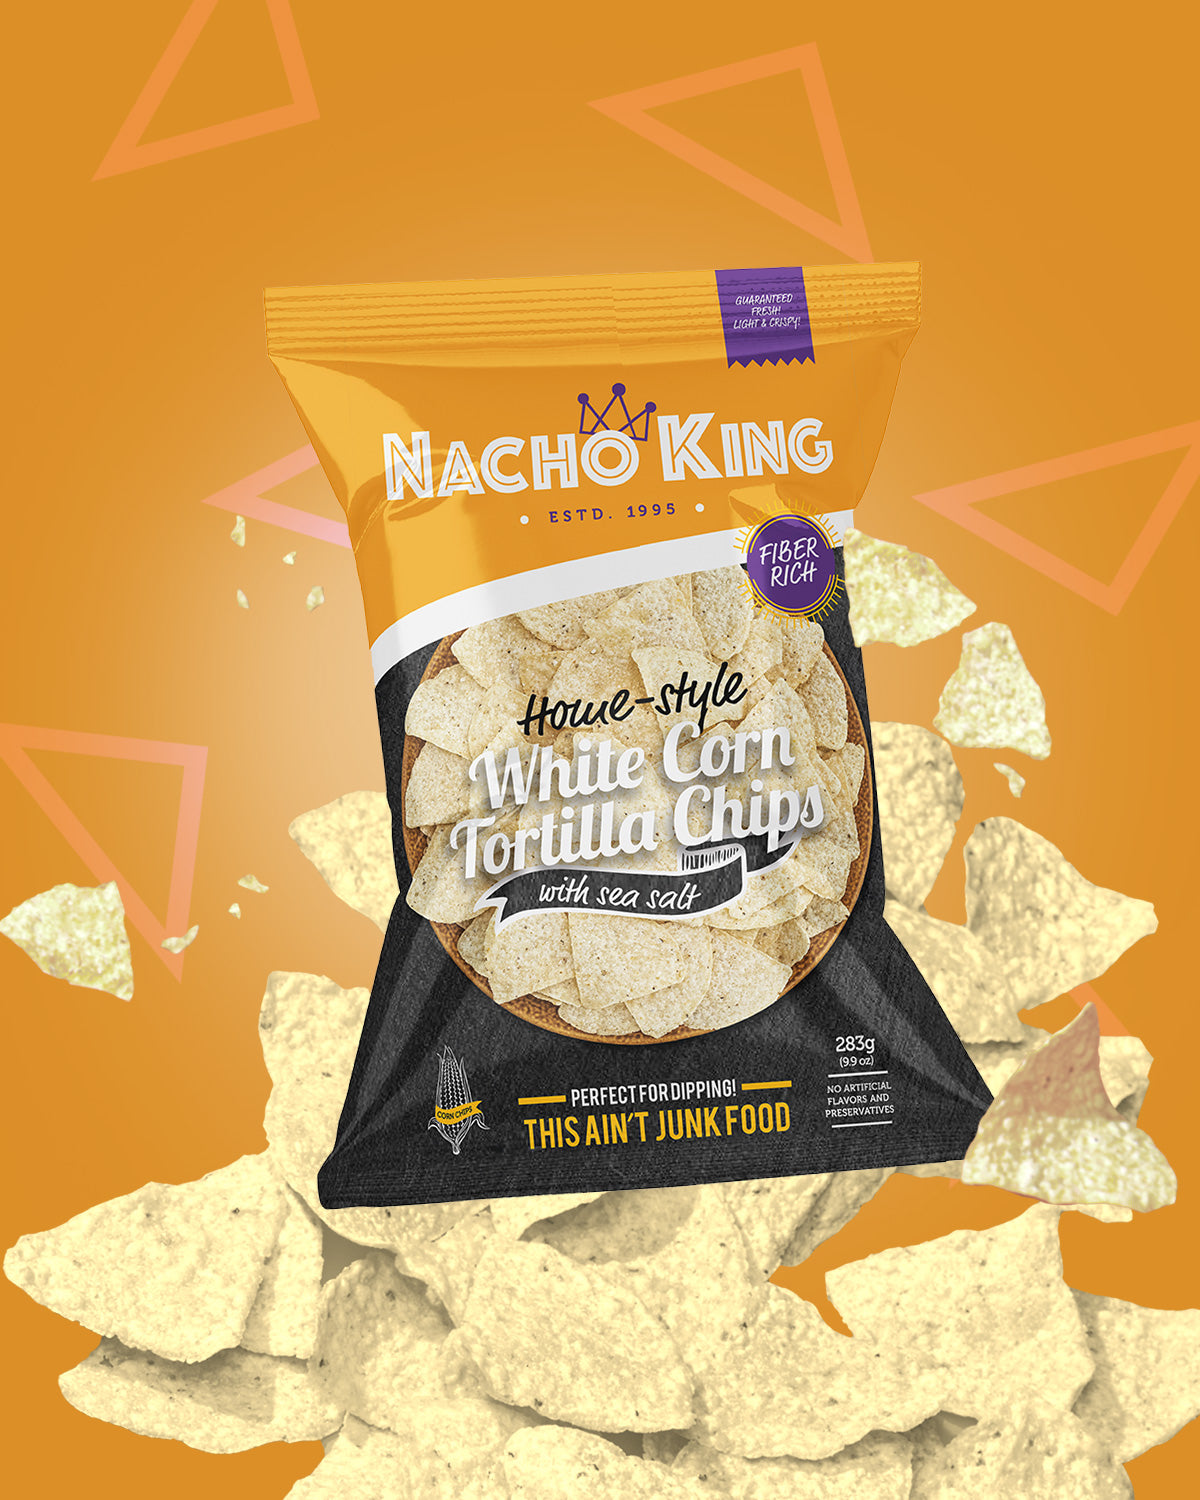 Home Style White Corn Tortilla Chips with Sea Salt